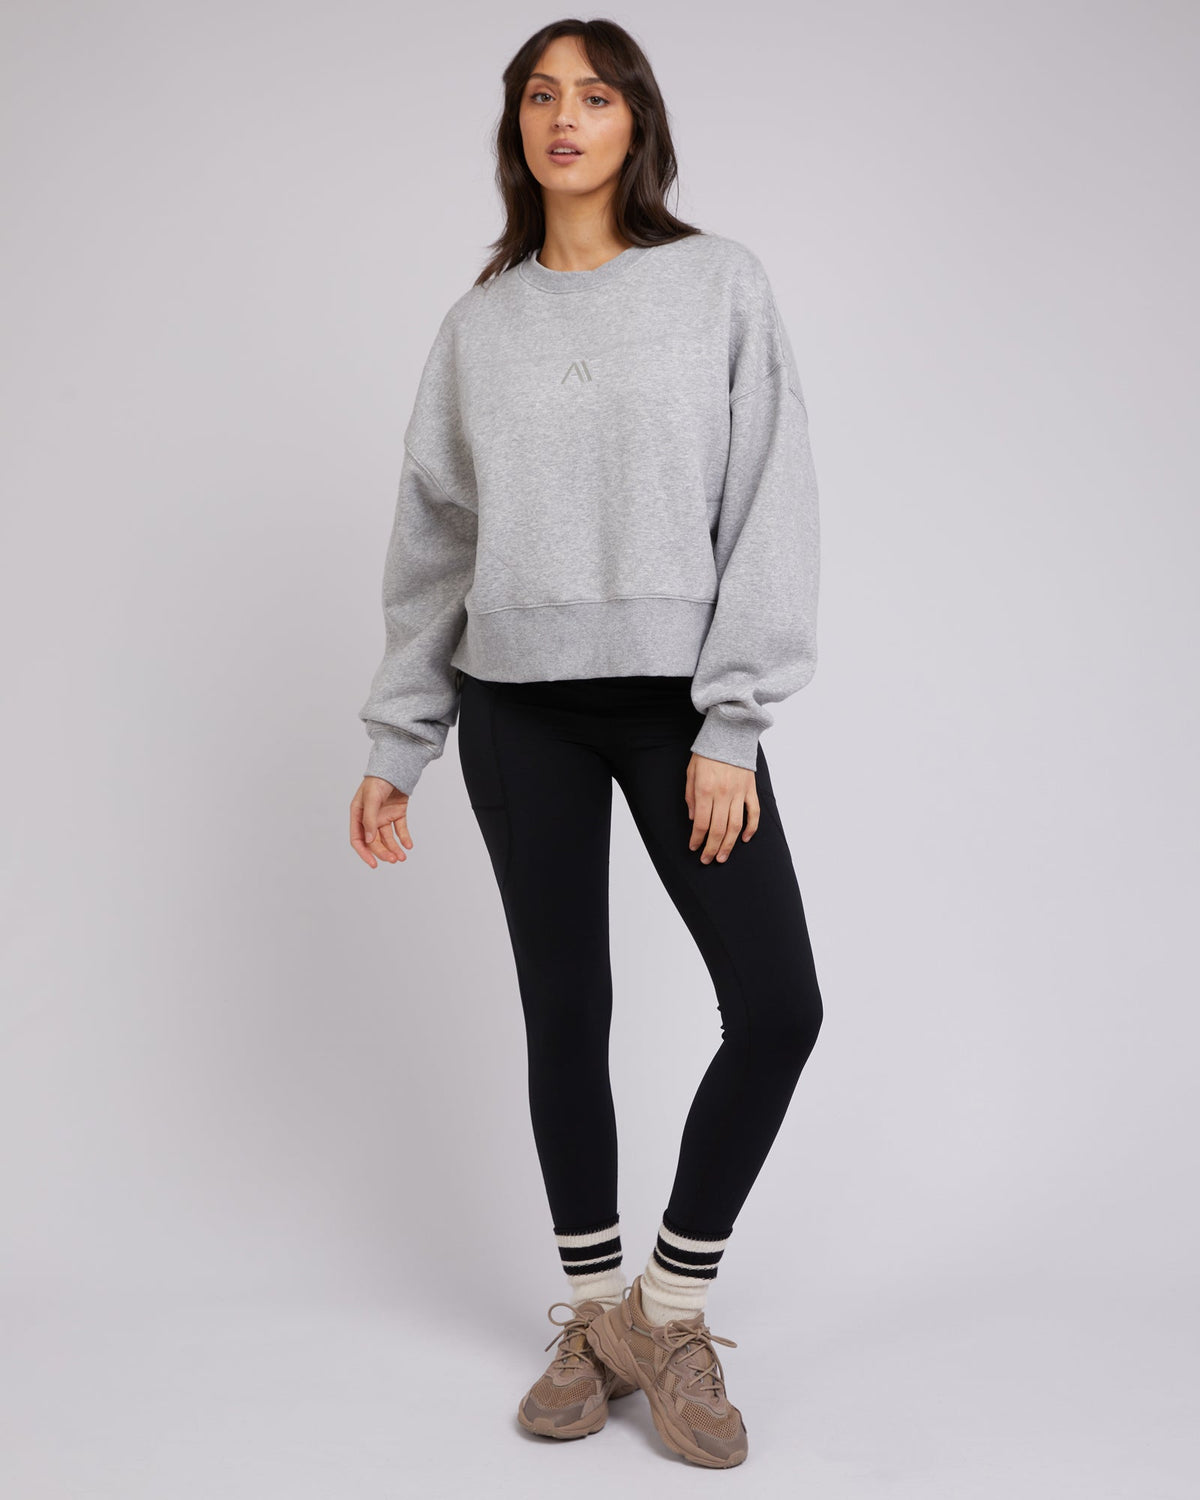 All About Eve-Active Tonal Sweater Grey Marle-Edge Clothing